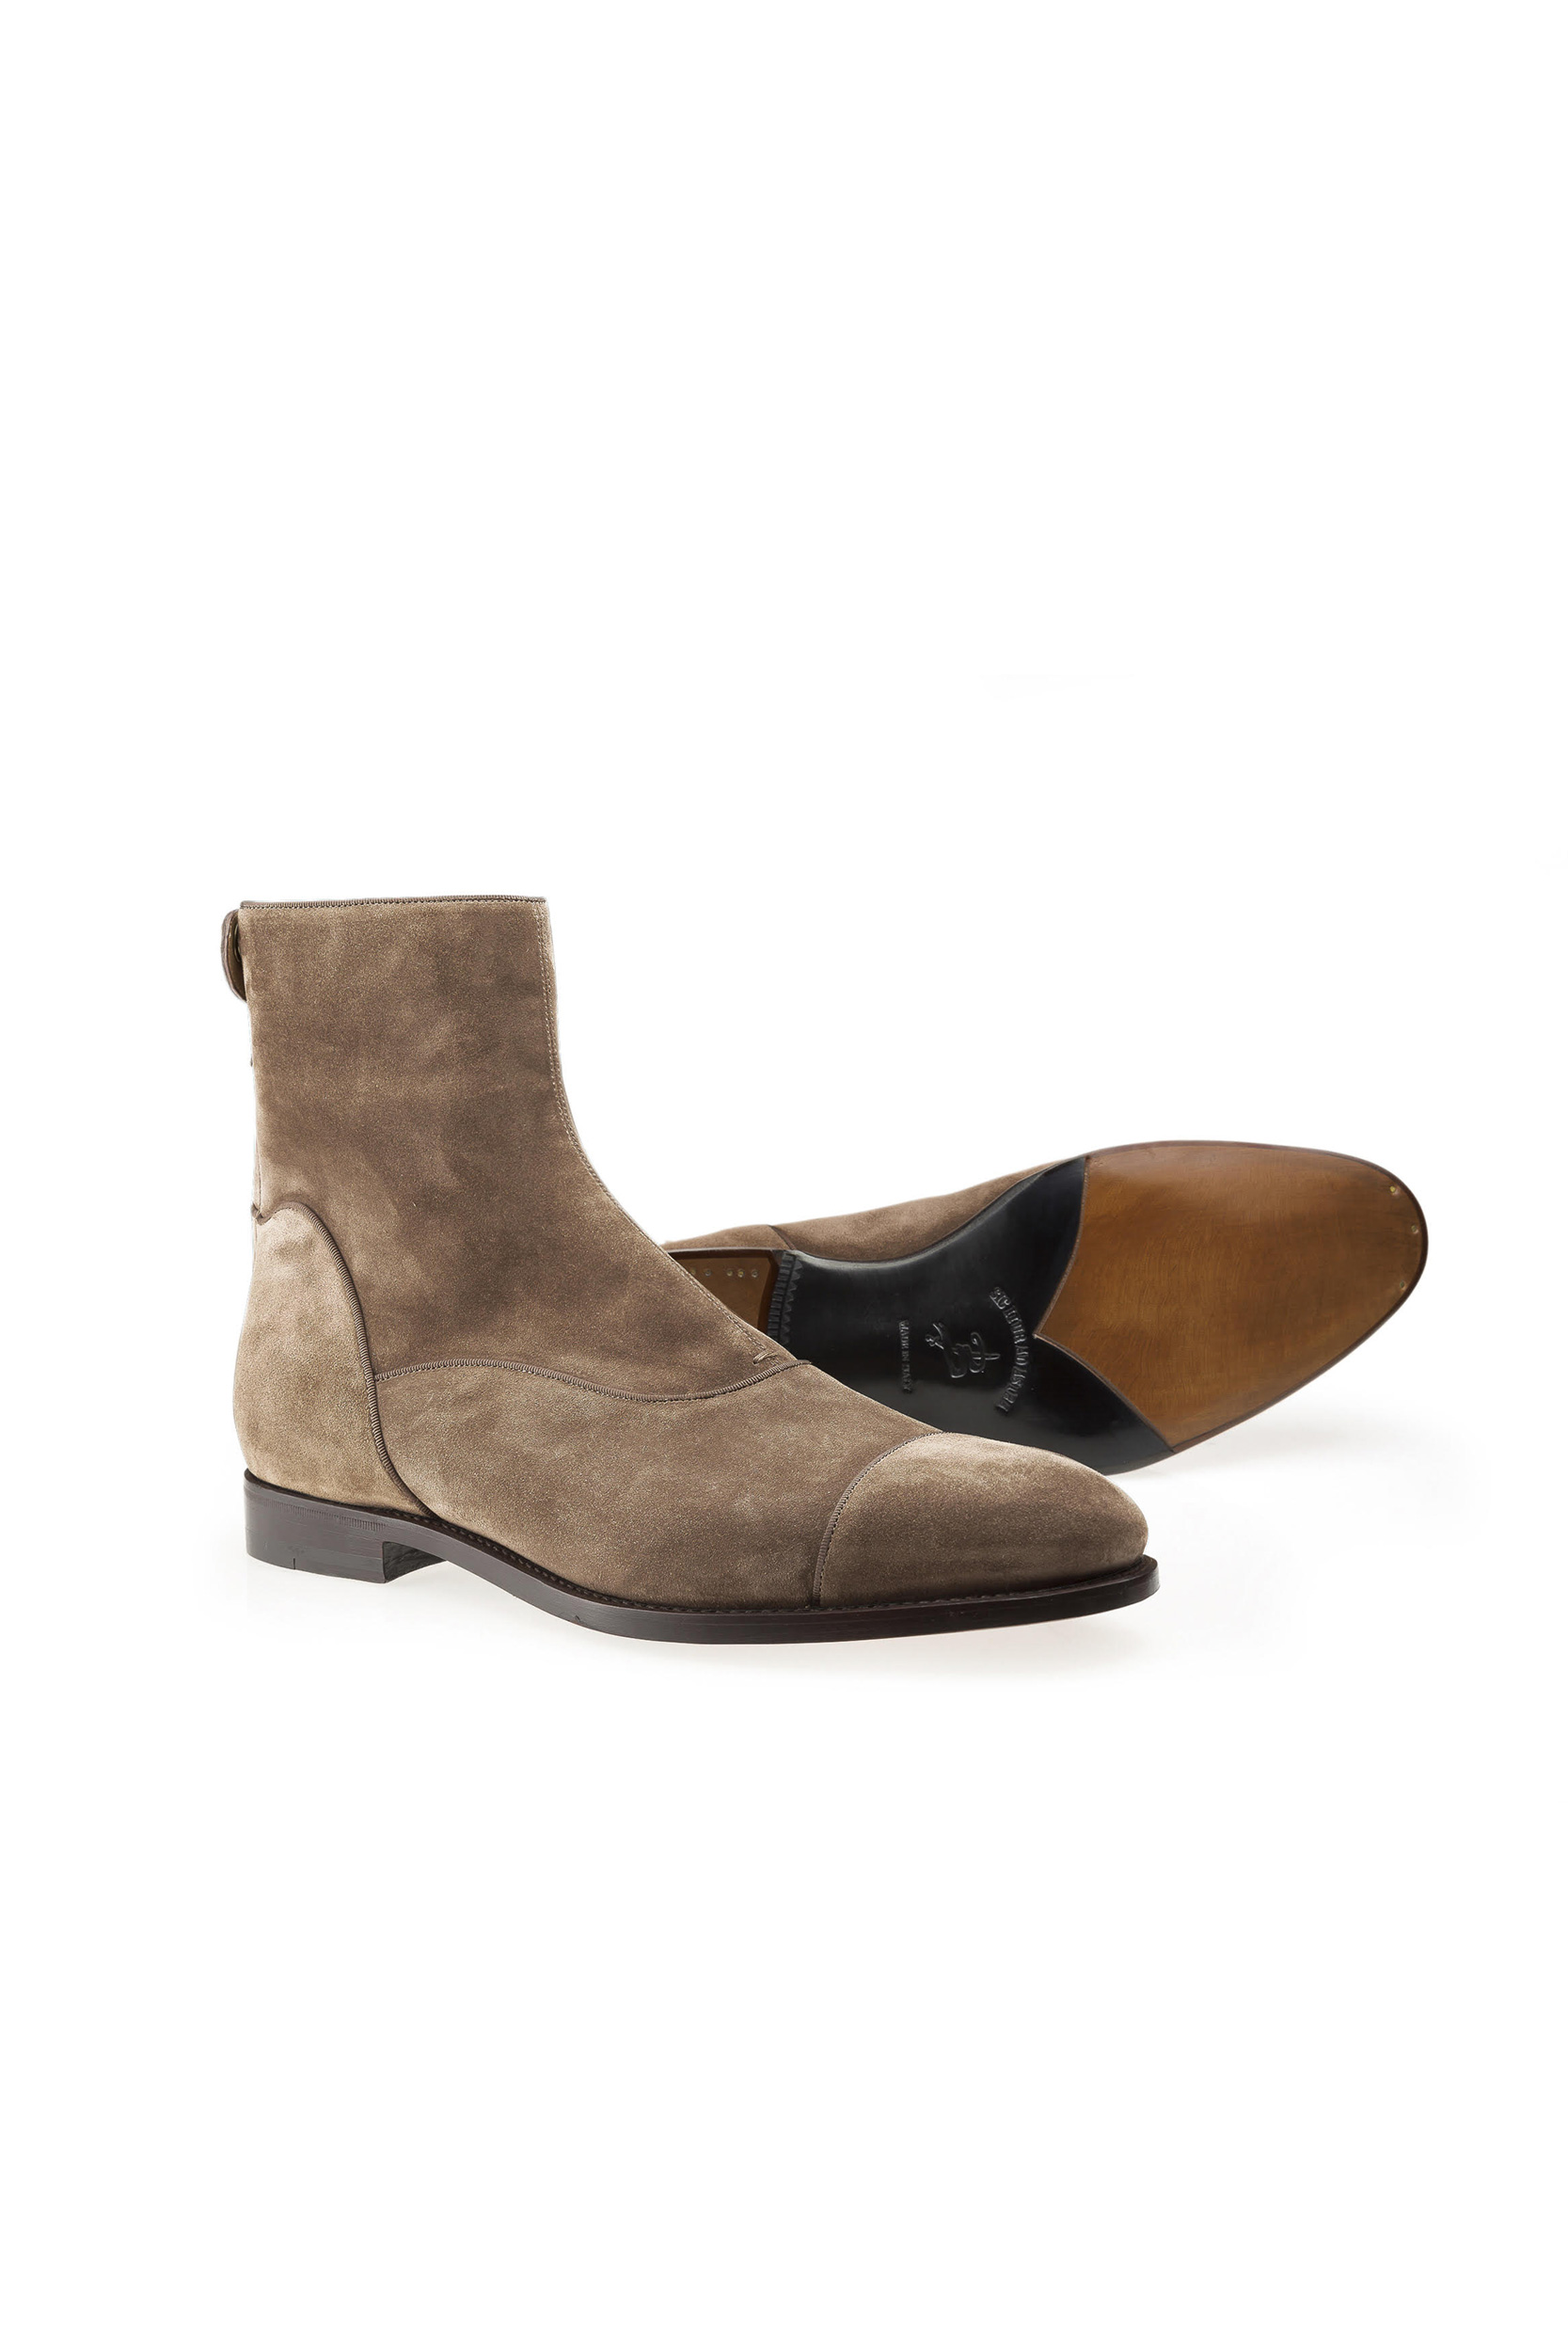 Ruskin Light Brown Ankle Boots - Barbanera